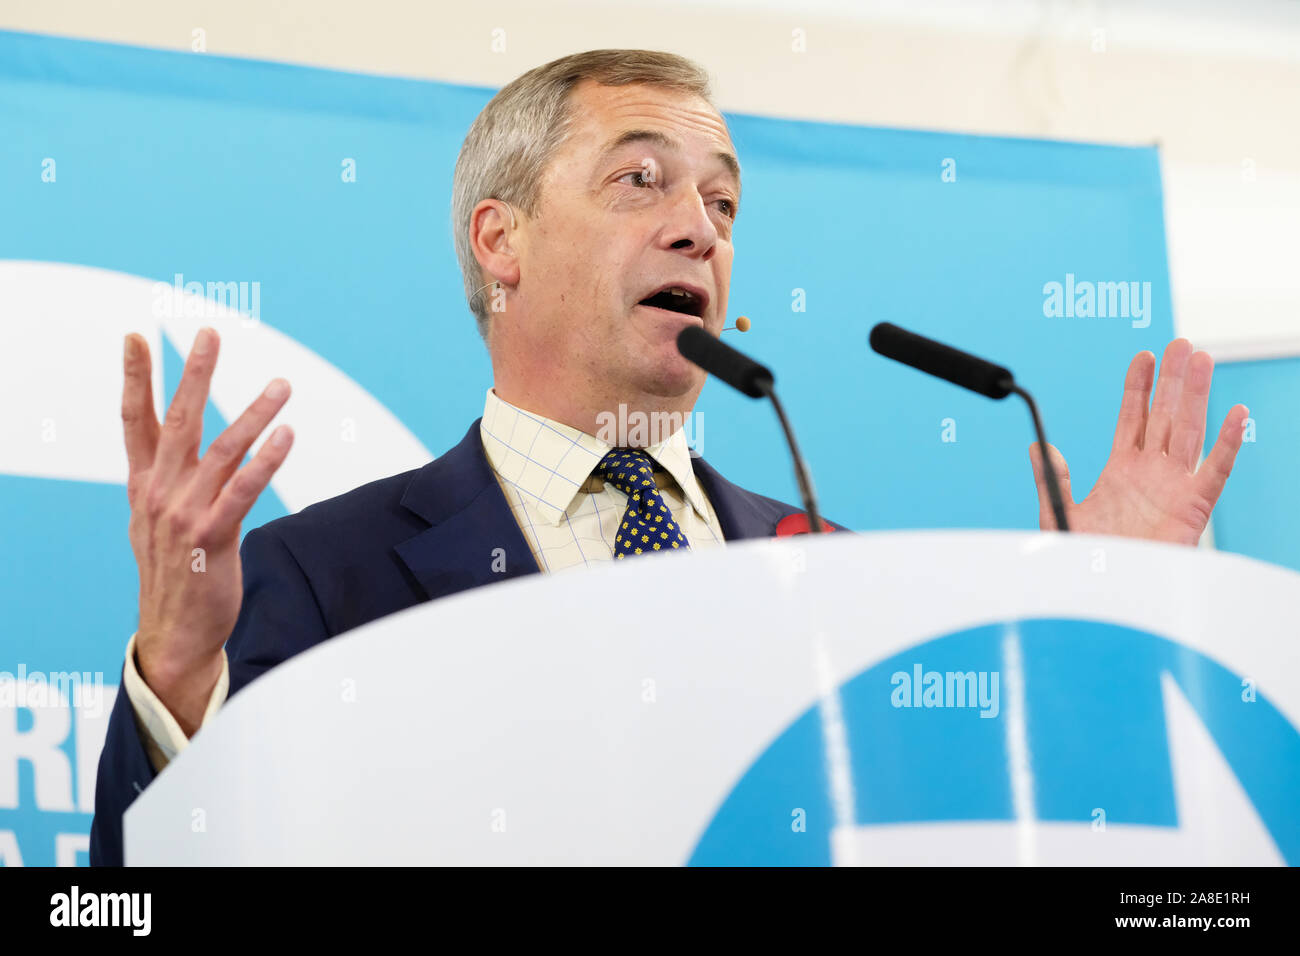 Little Mill, Pontypool, Monmouthshire, Wales - Friday 8th November 2019 - Brexit Party leader Nigel Farage addresses an audience in the south Wales town of Pontypool a strong Labour voting area. Photo Steven May / Alamy Live News  Stock Photo